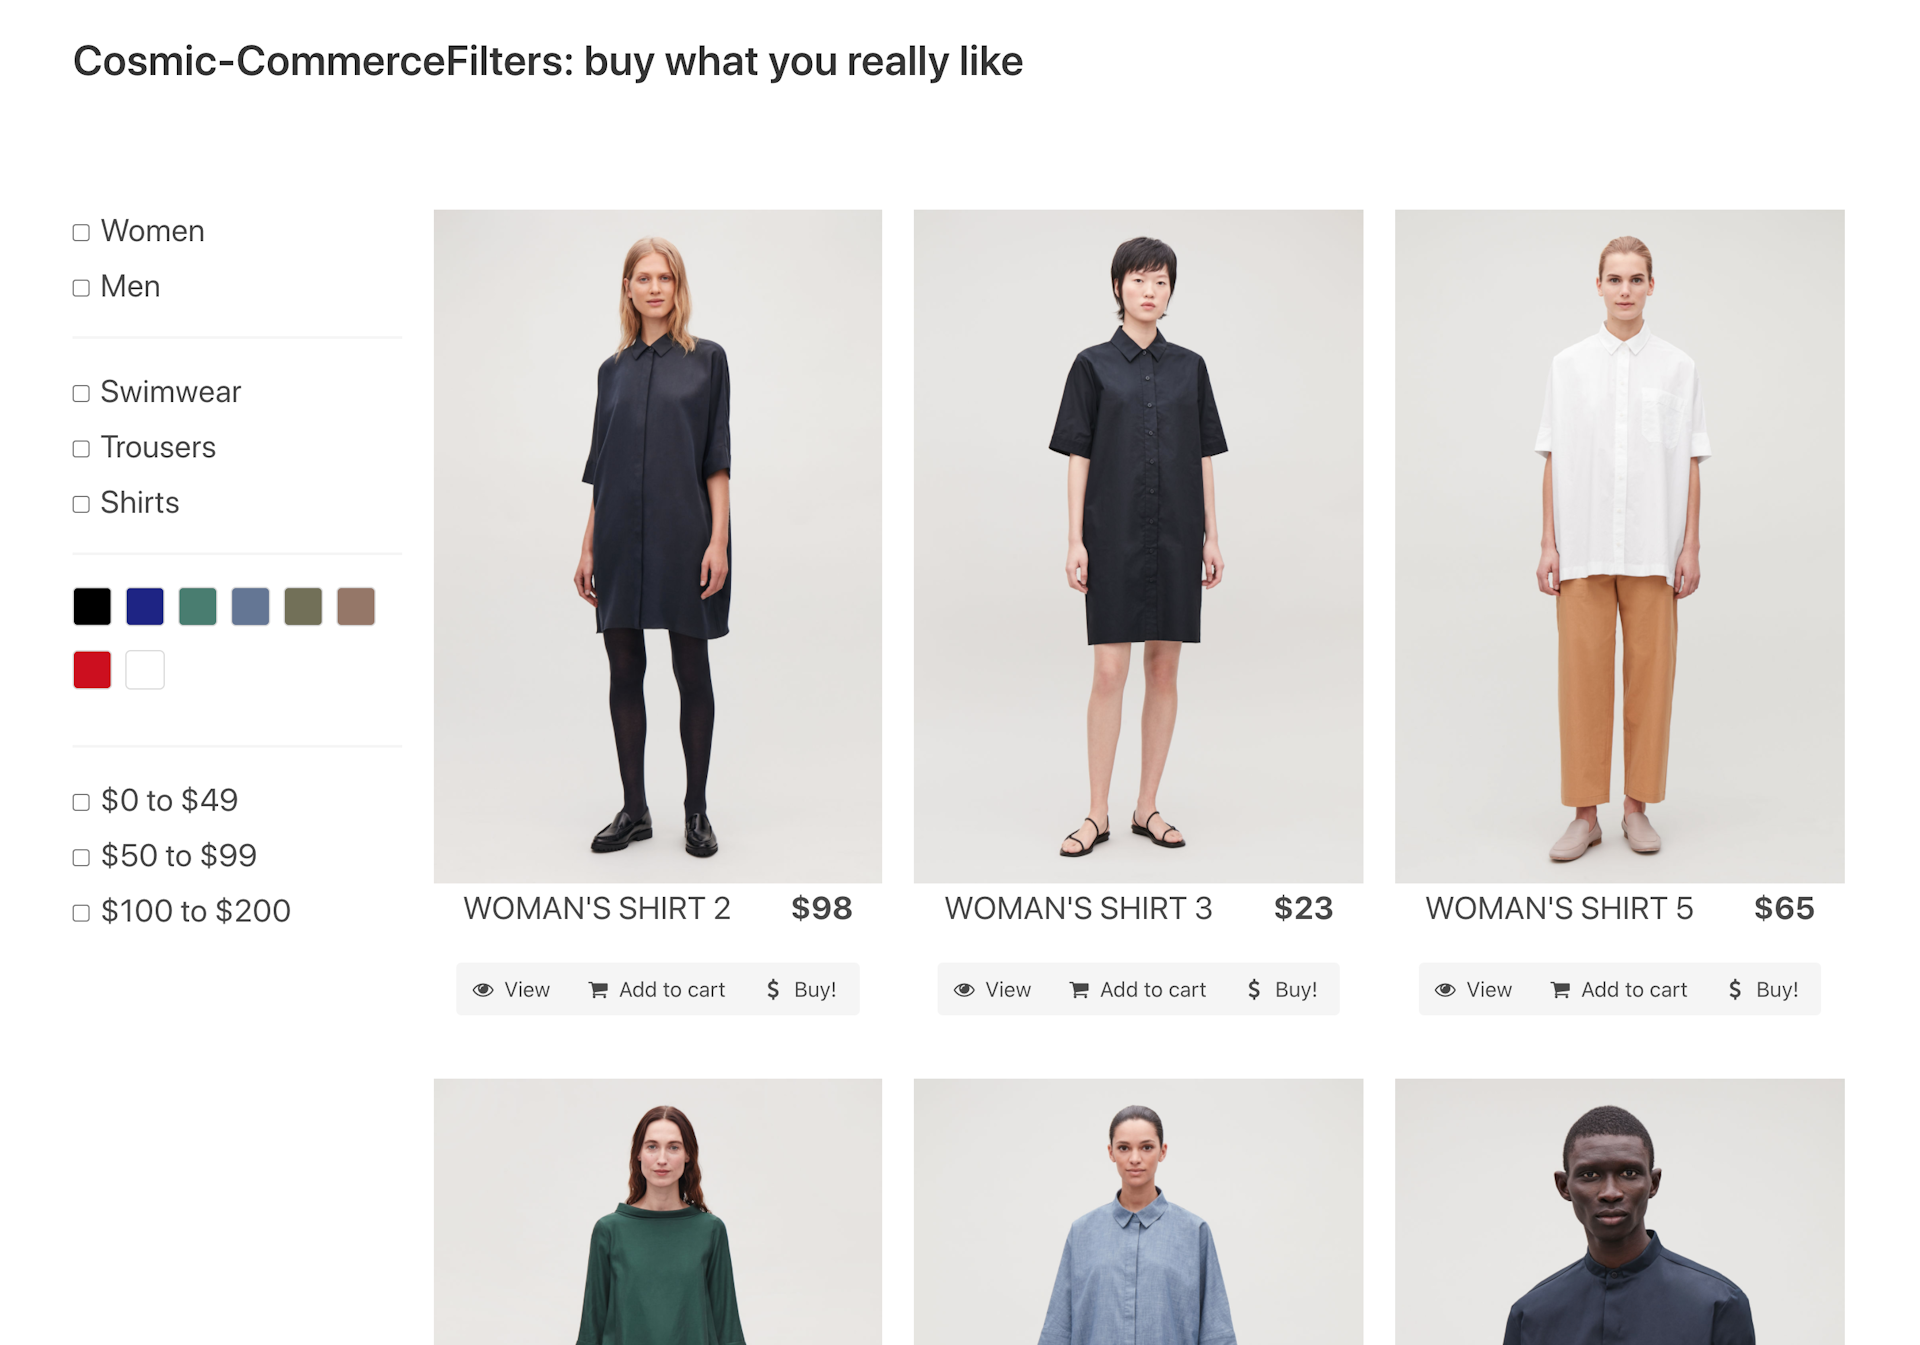 Ecommerce with Filters hero image